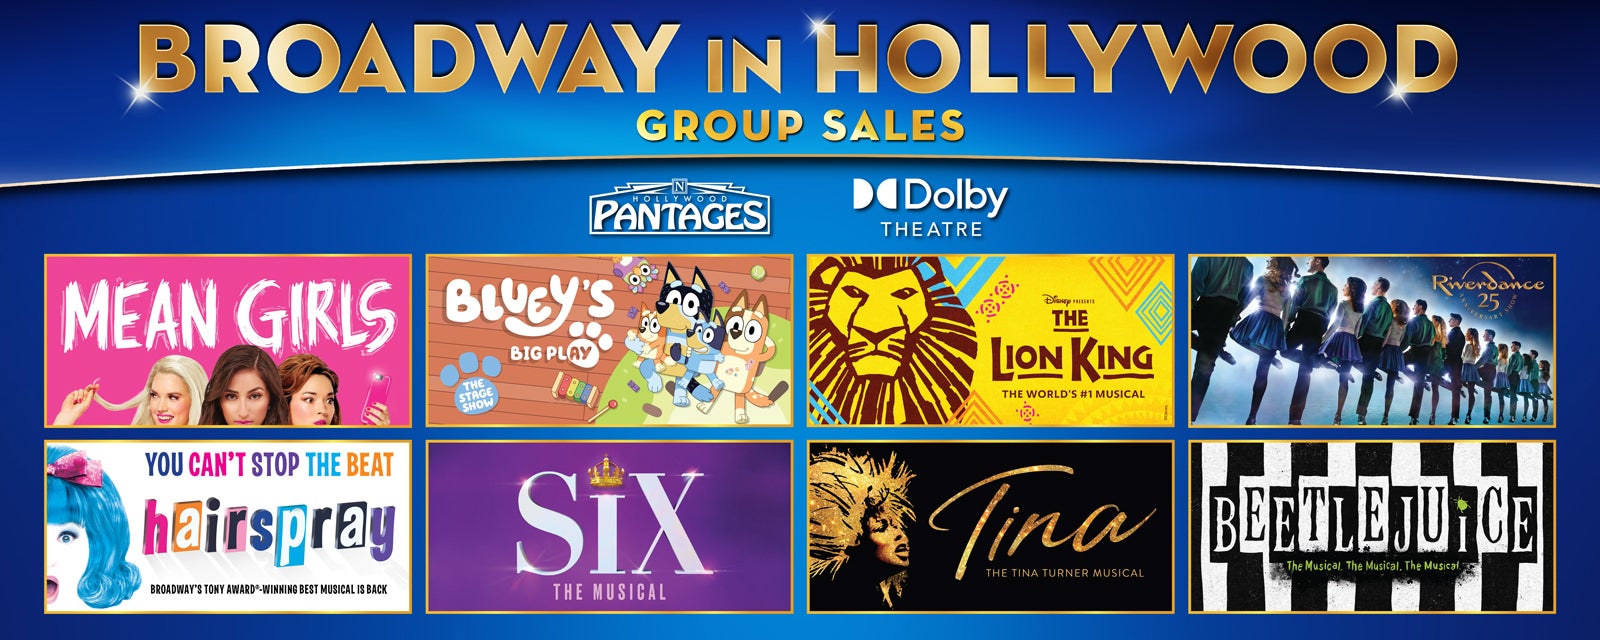 Broadway In Hollywood Group Sales at the Hollywood Pantages and Dolby Theatres.